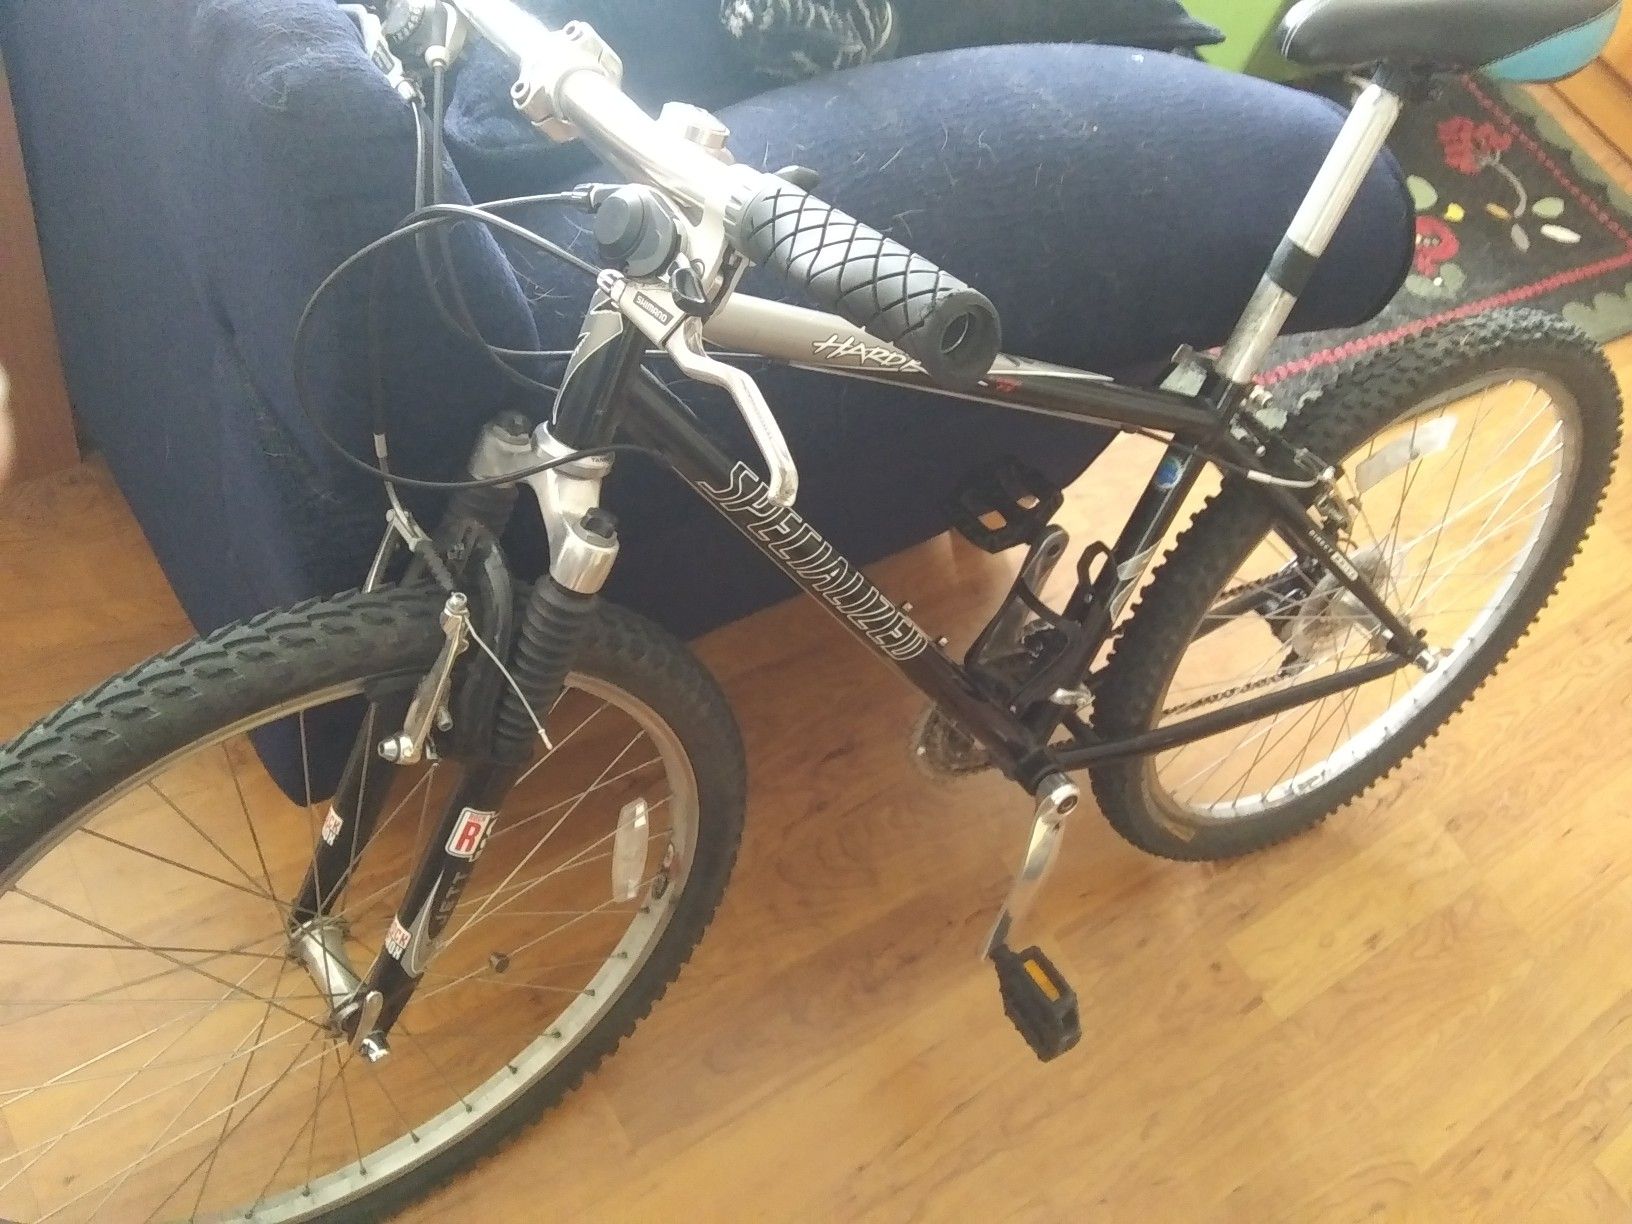 specialized hard rock cromo, huffy stalker, Sony vpcw121ax laptop, fenders tire and sprocket